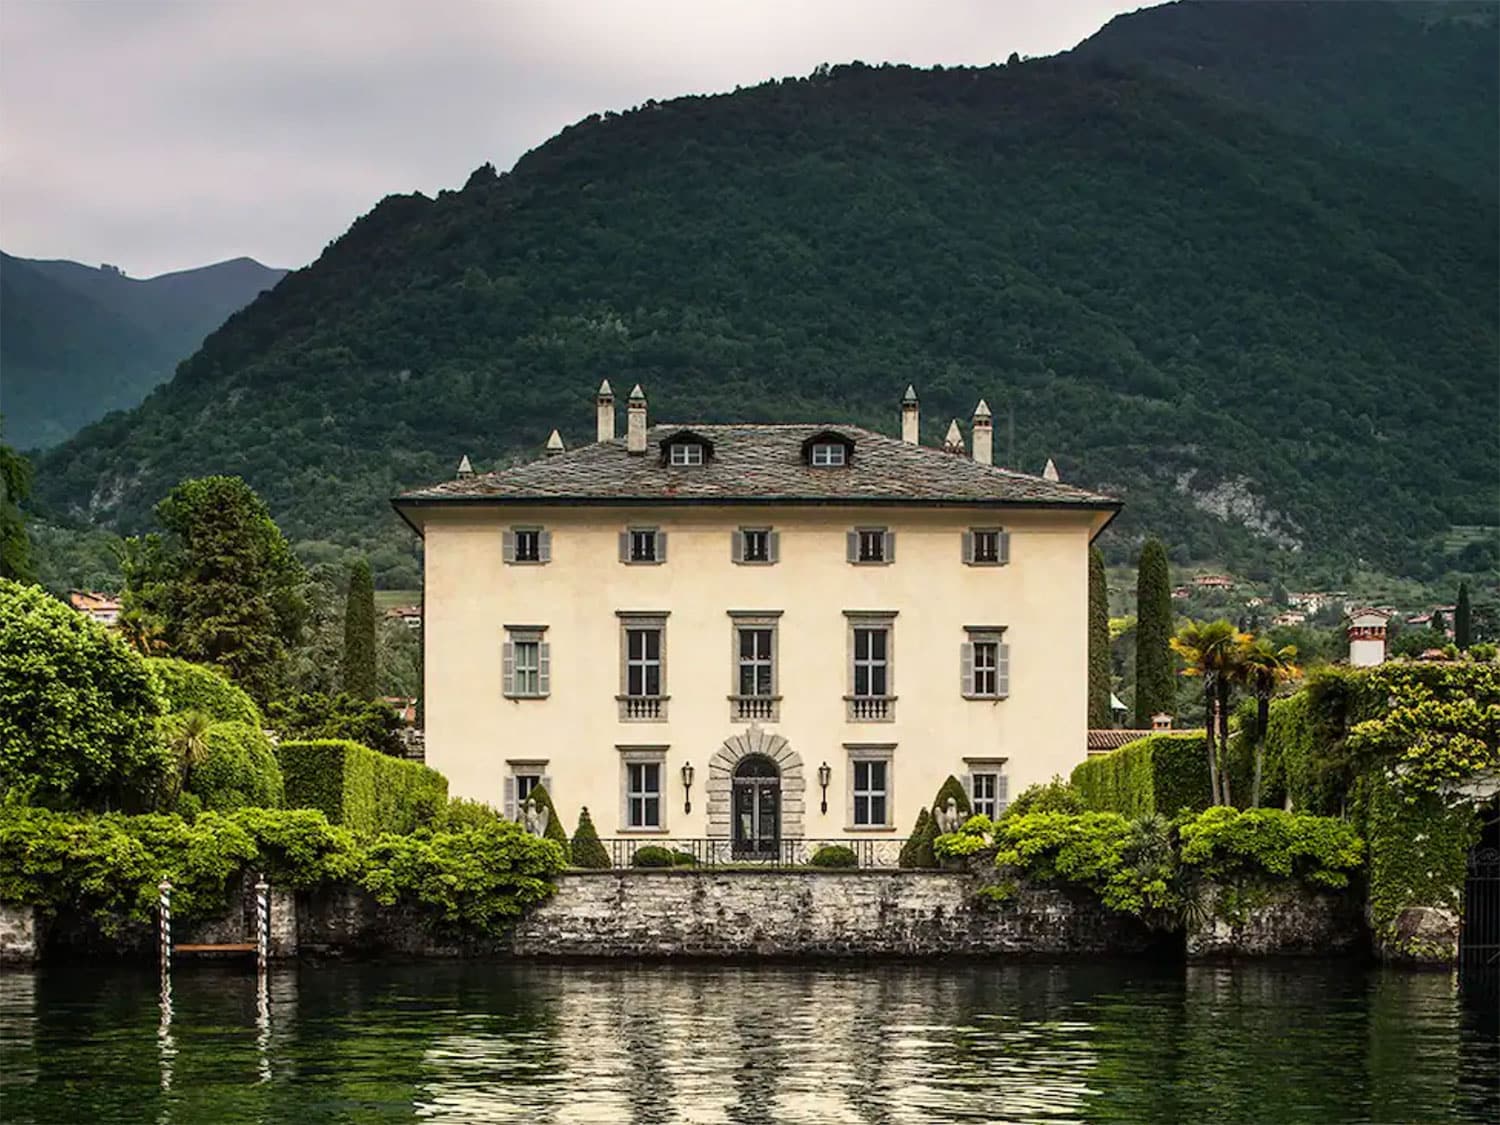 Villa Balbiano, the house of Gucci home. Mountain hills in the horizon.